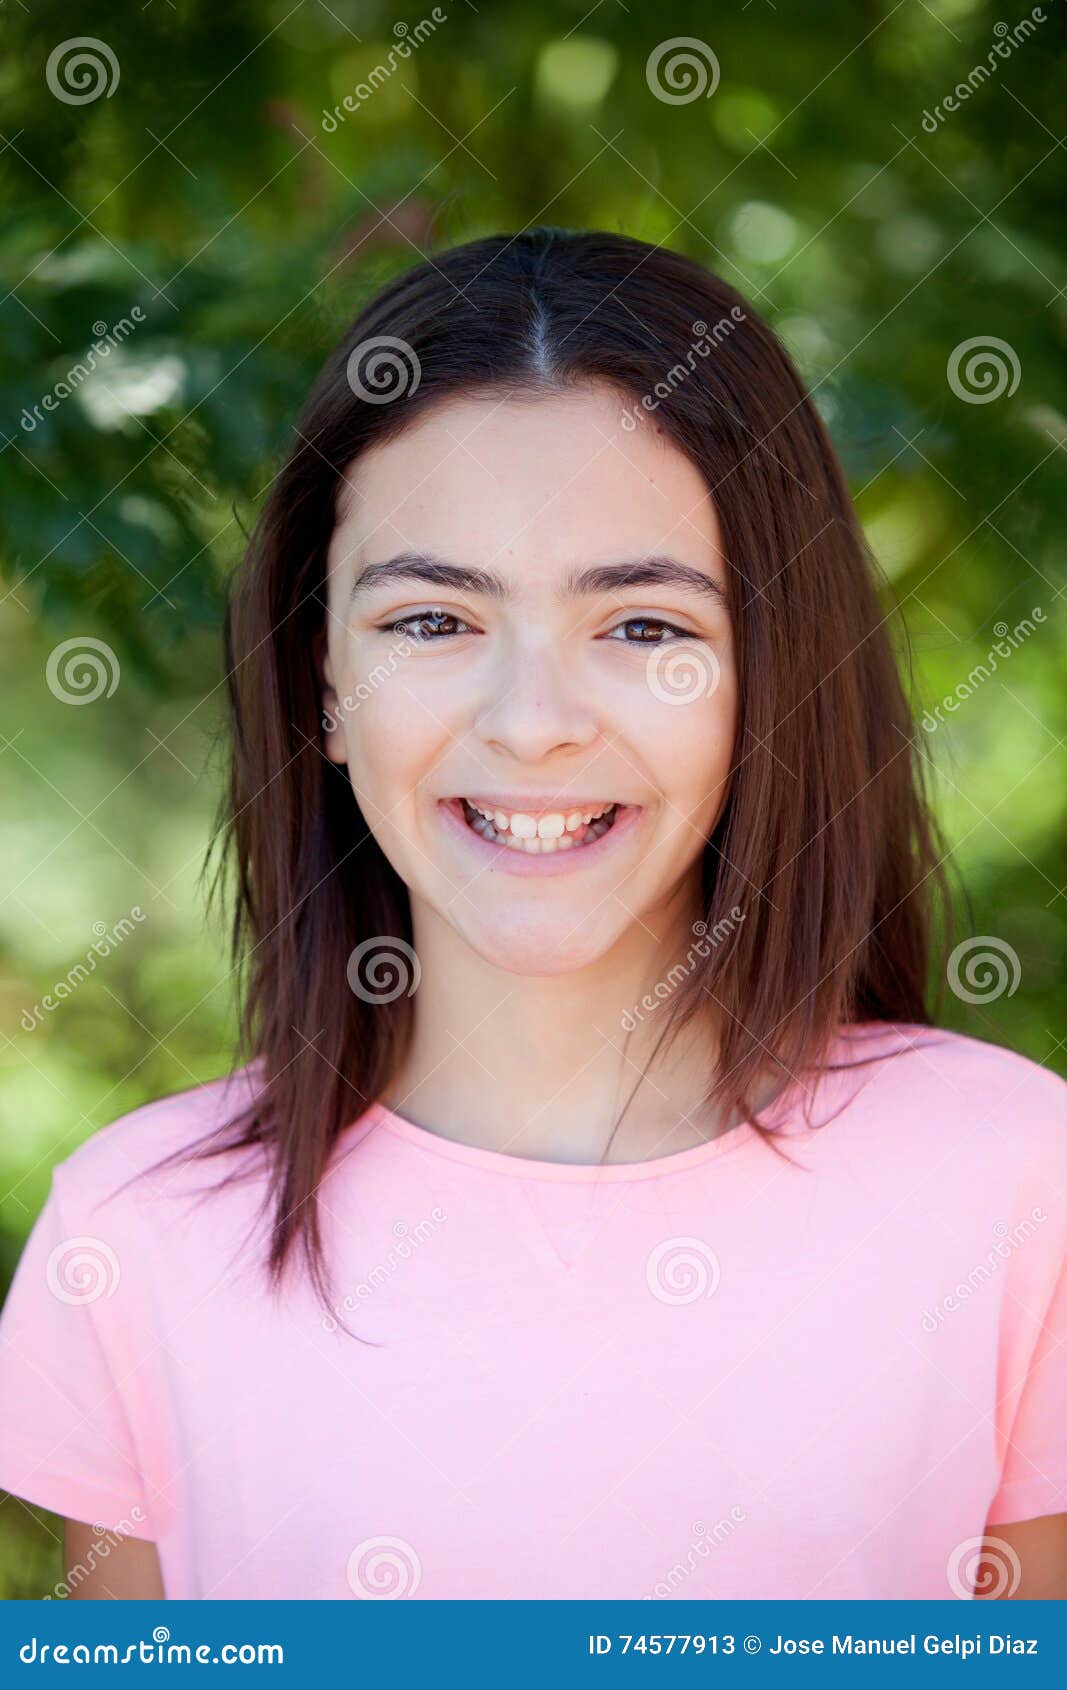 Adorable preteen stock image. Image of beauty, leisure - 74577913